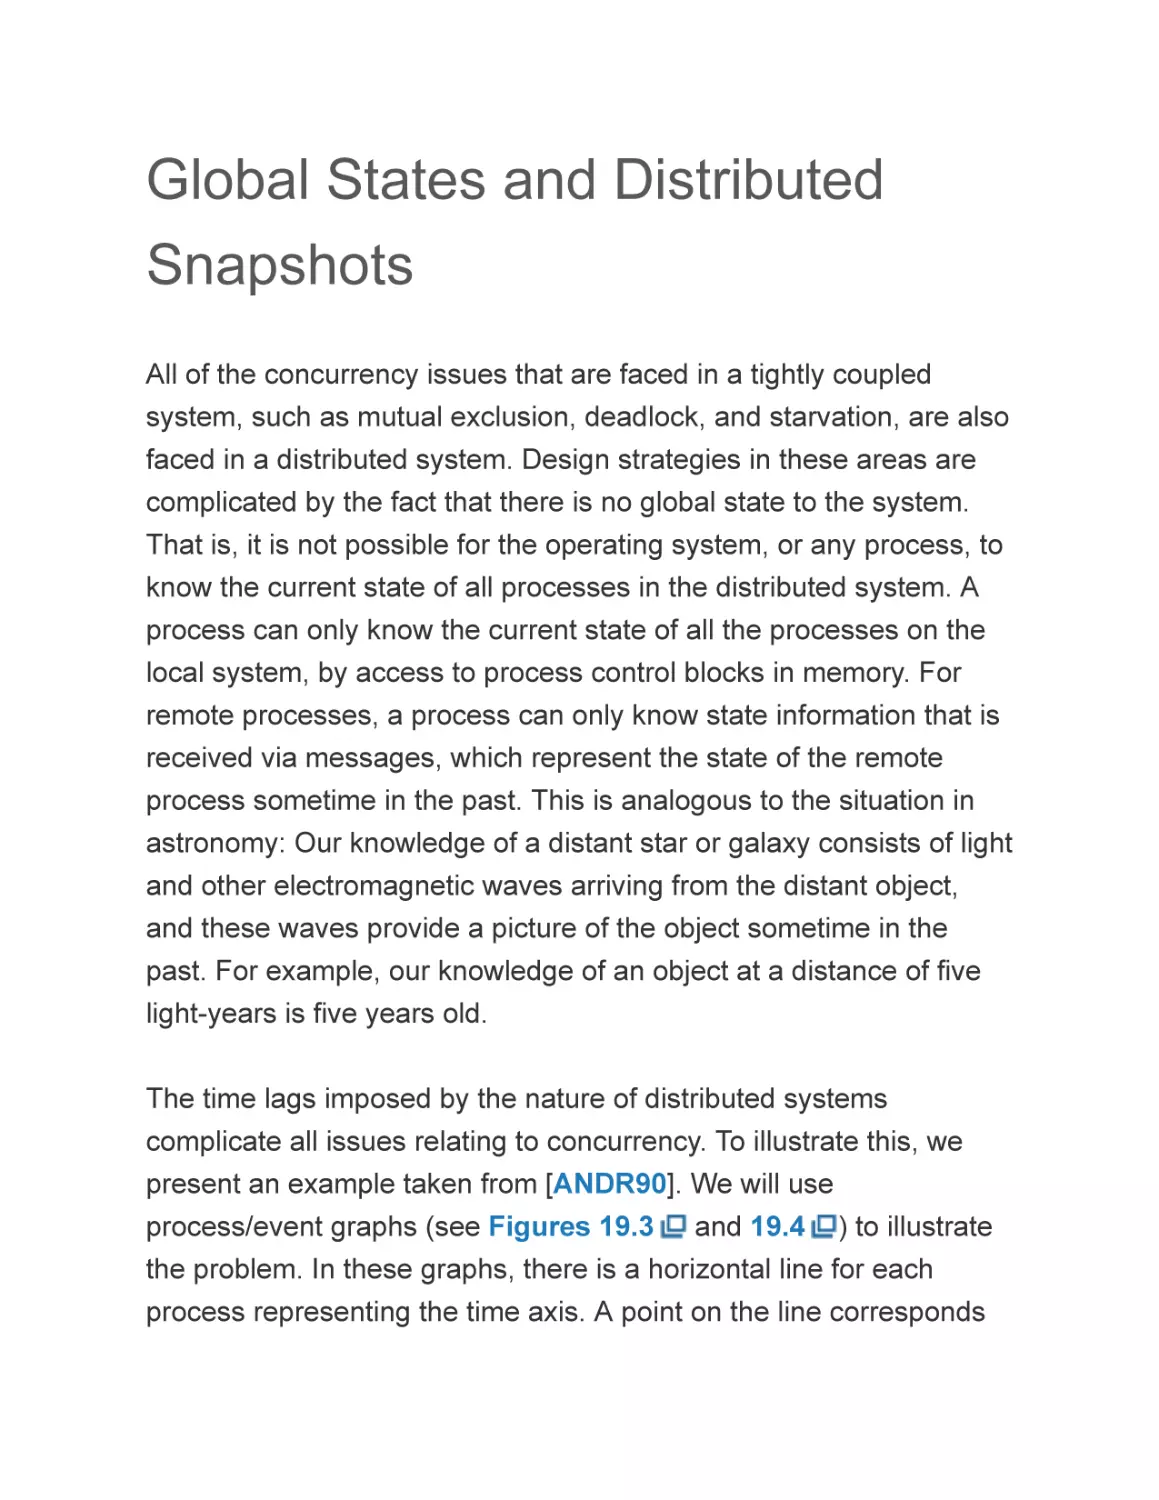 Global States and Distributed Snapshots